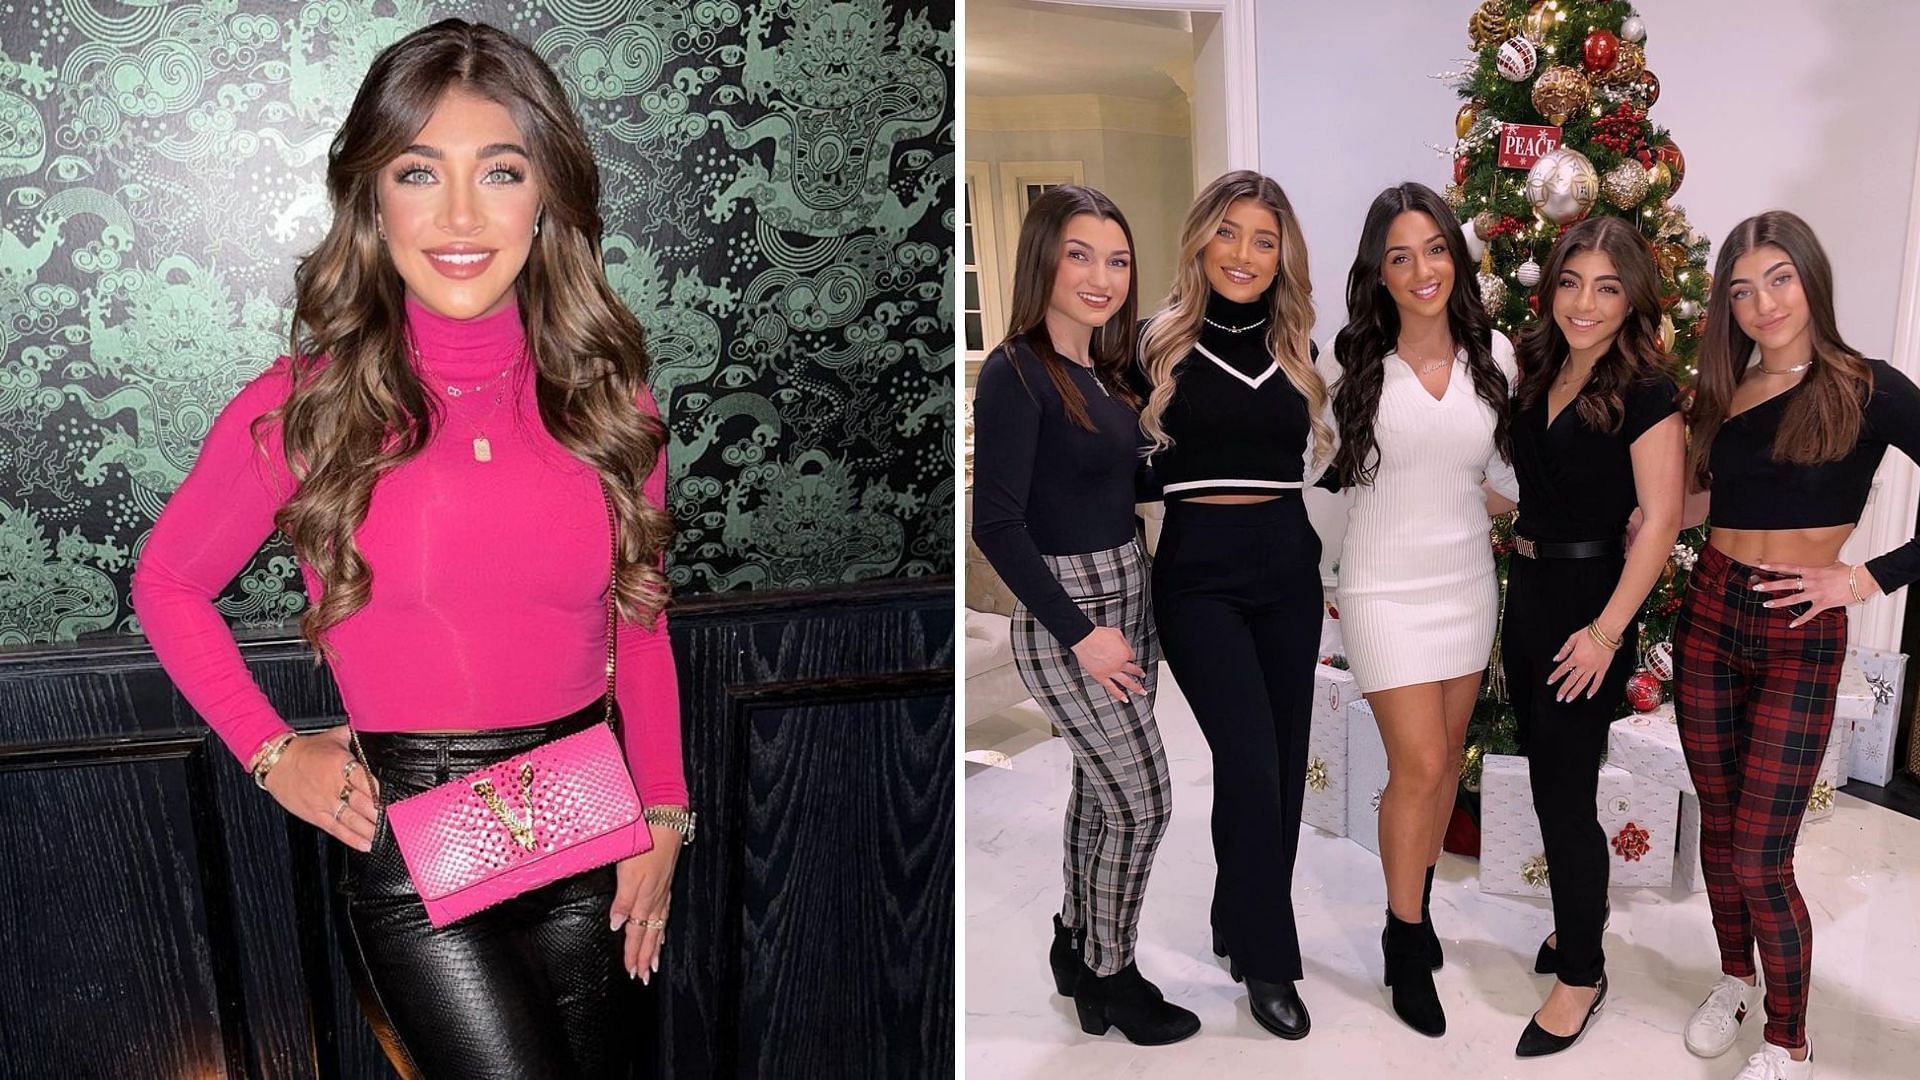 Gia Giudice opens up about the family dynamic on RHONJ